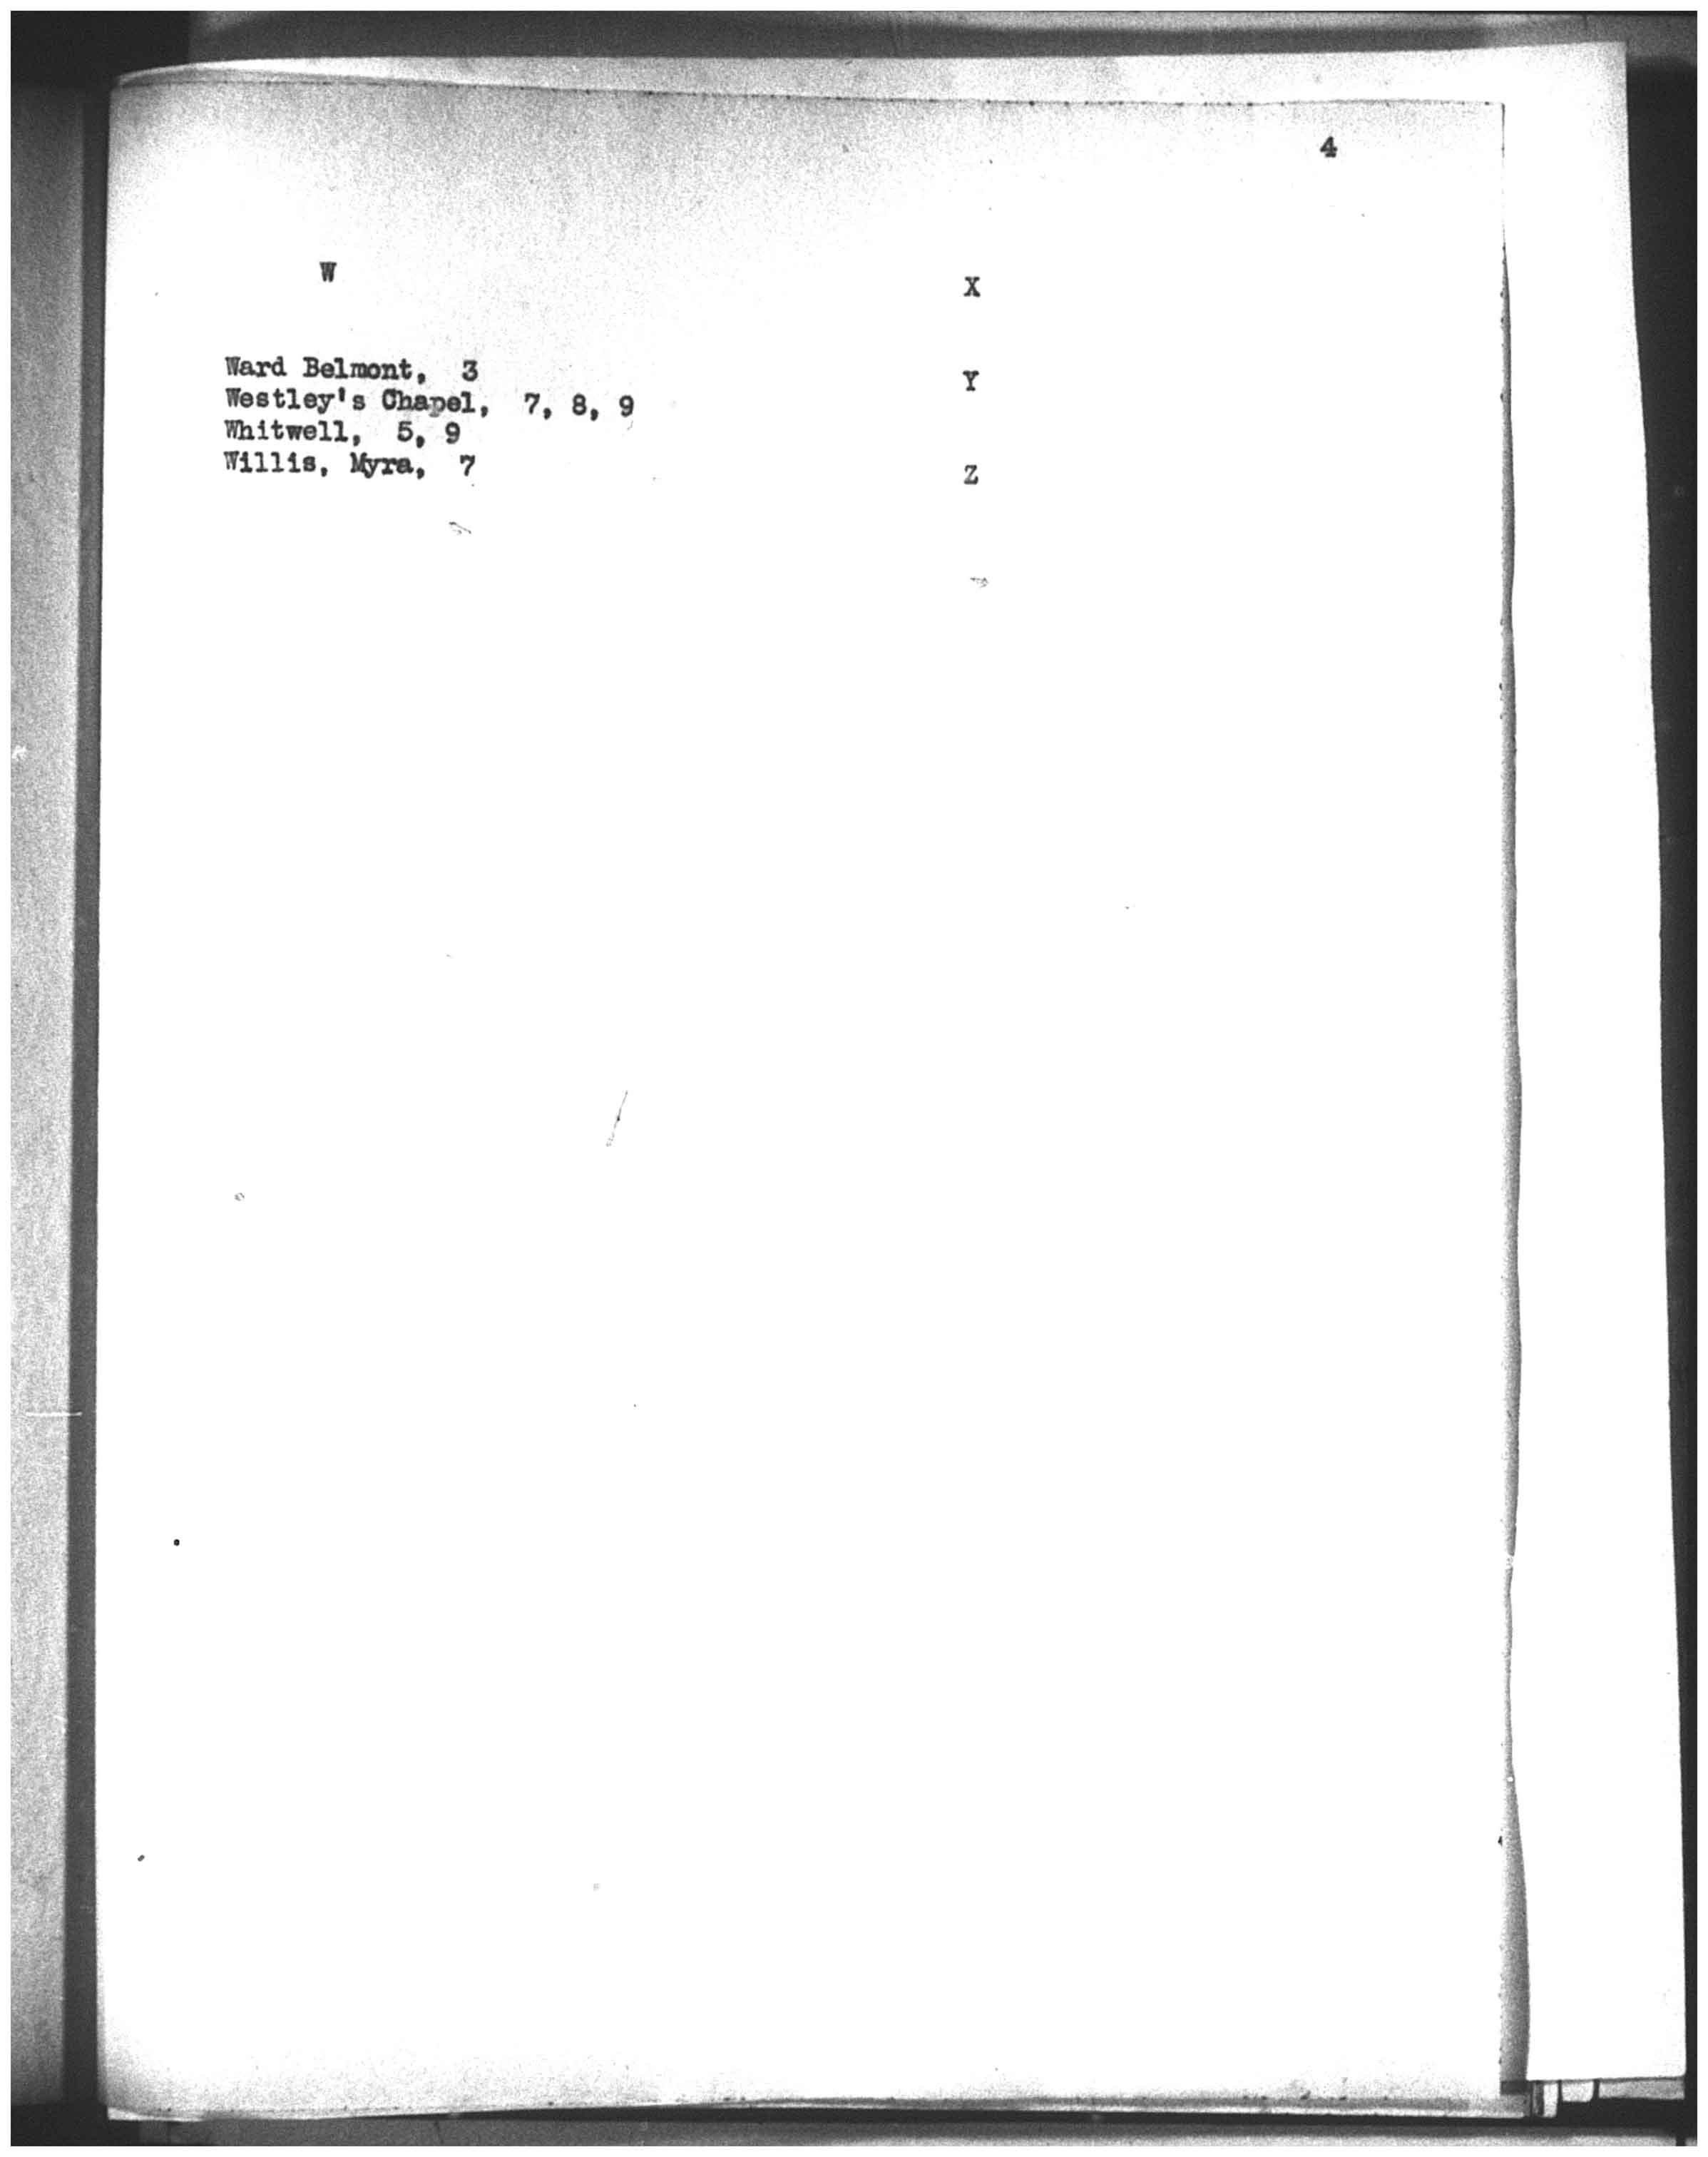 document page